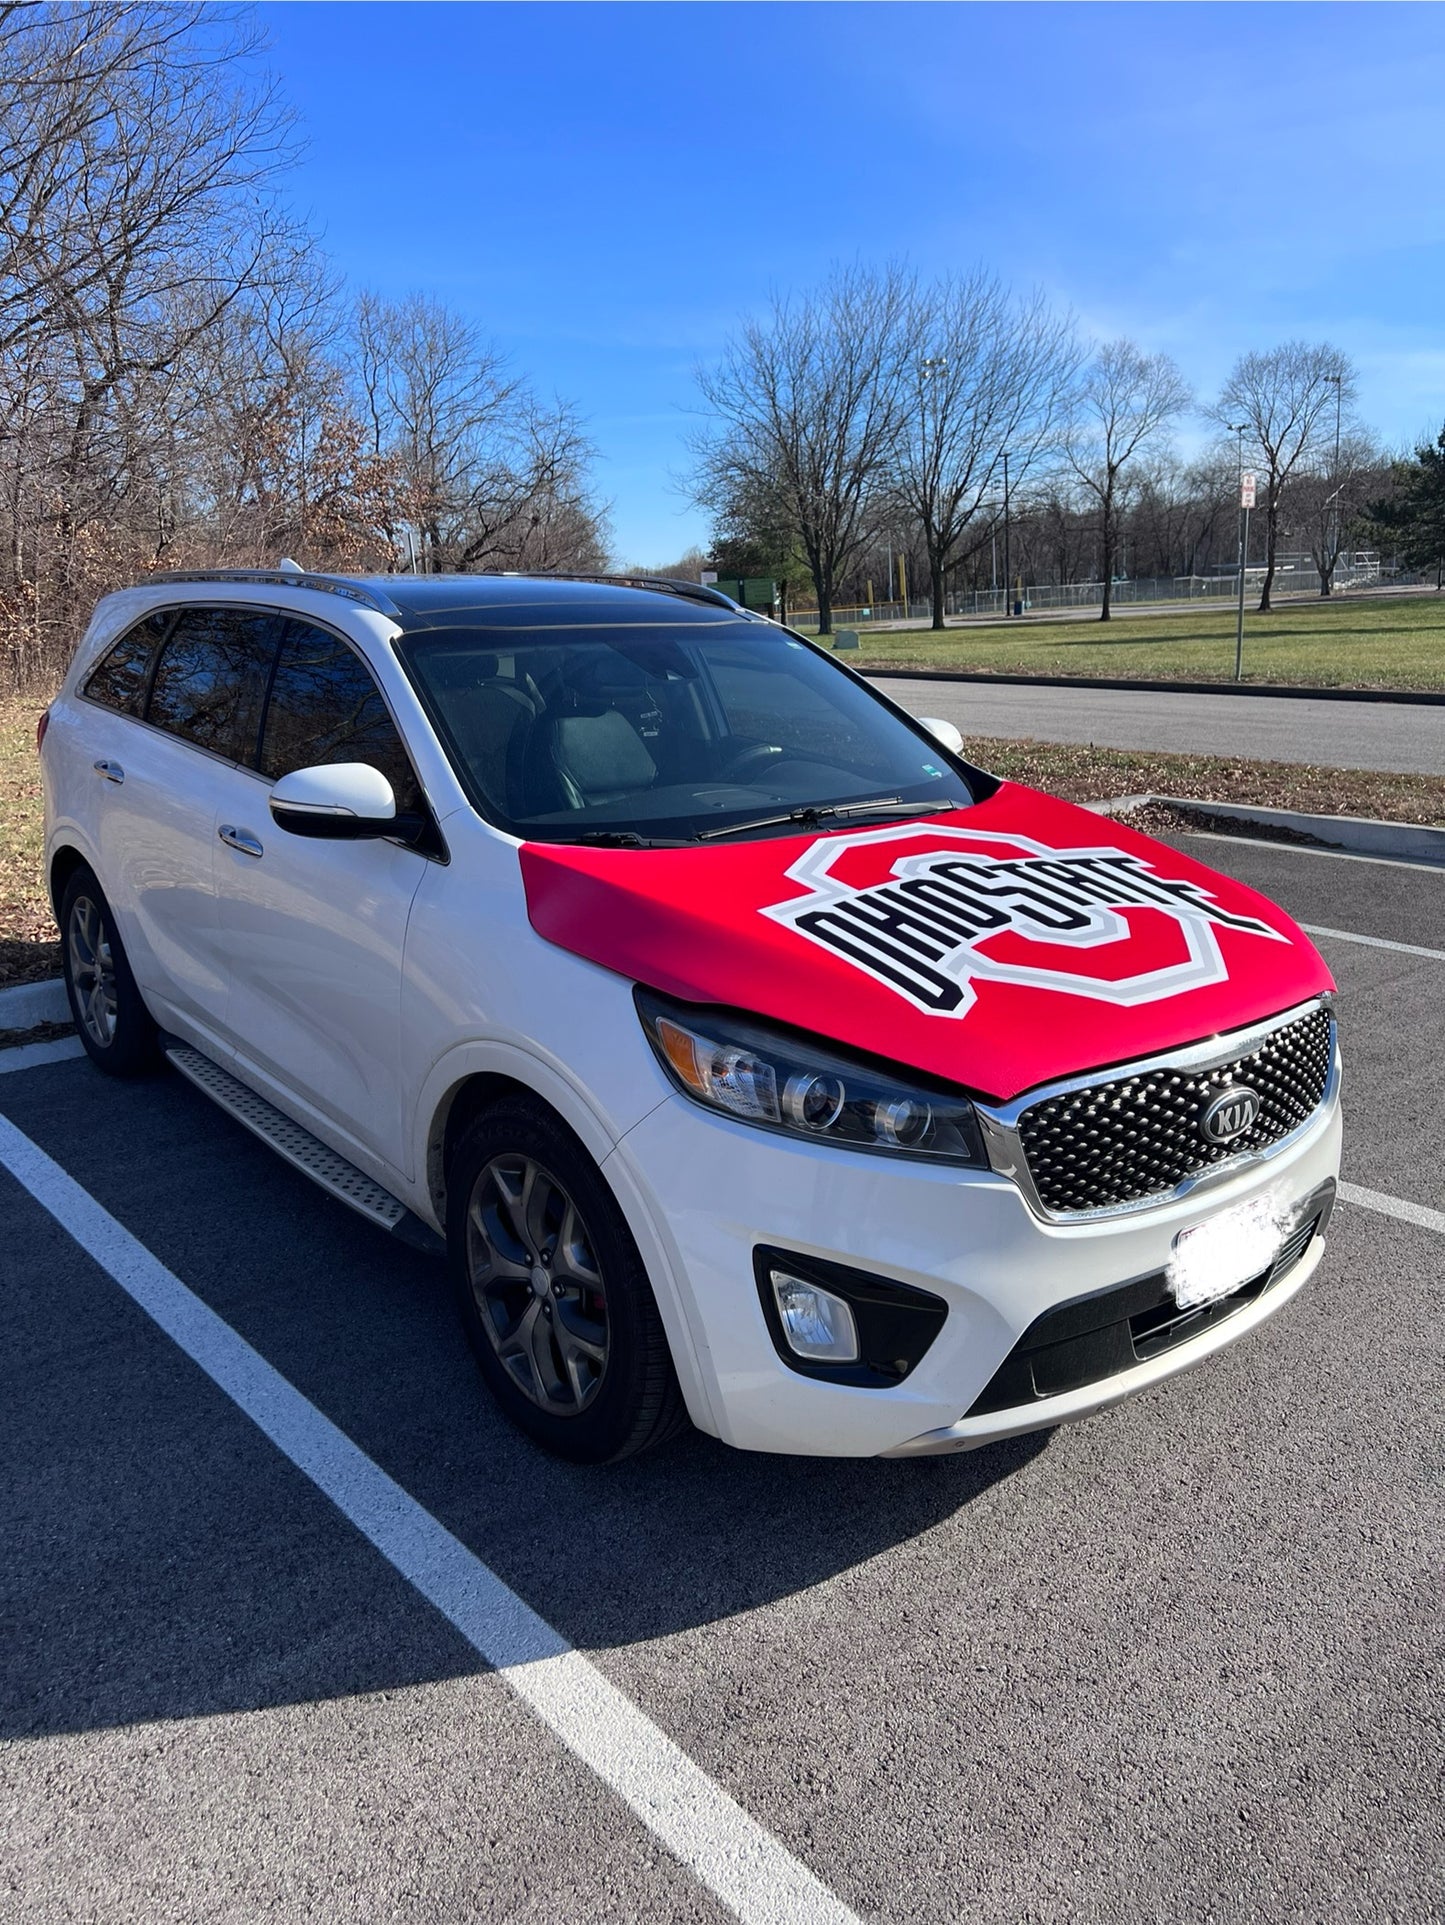 Ohio State College Car Hood Cover